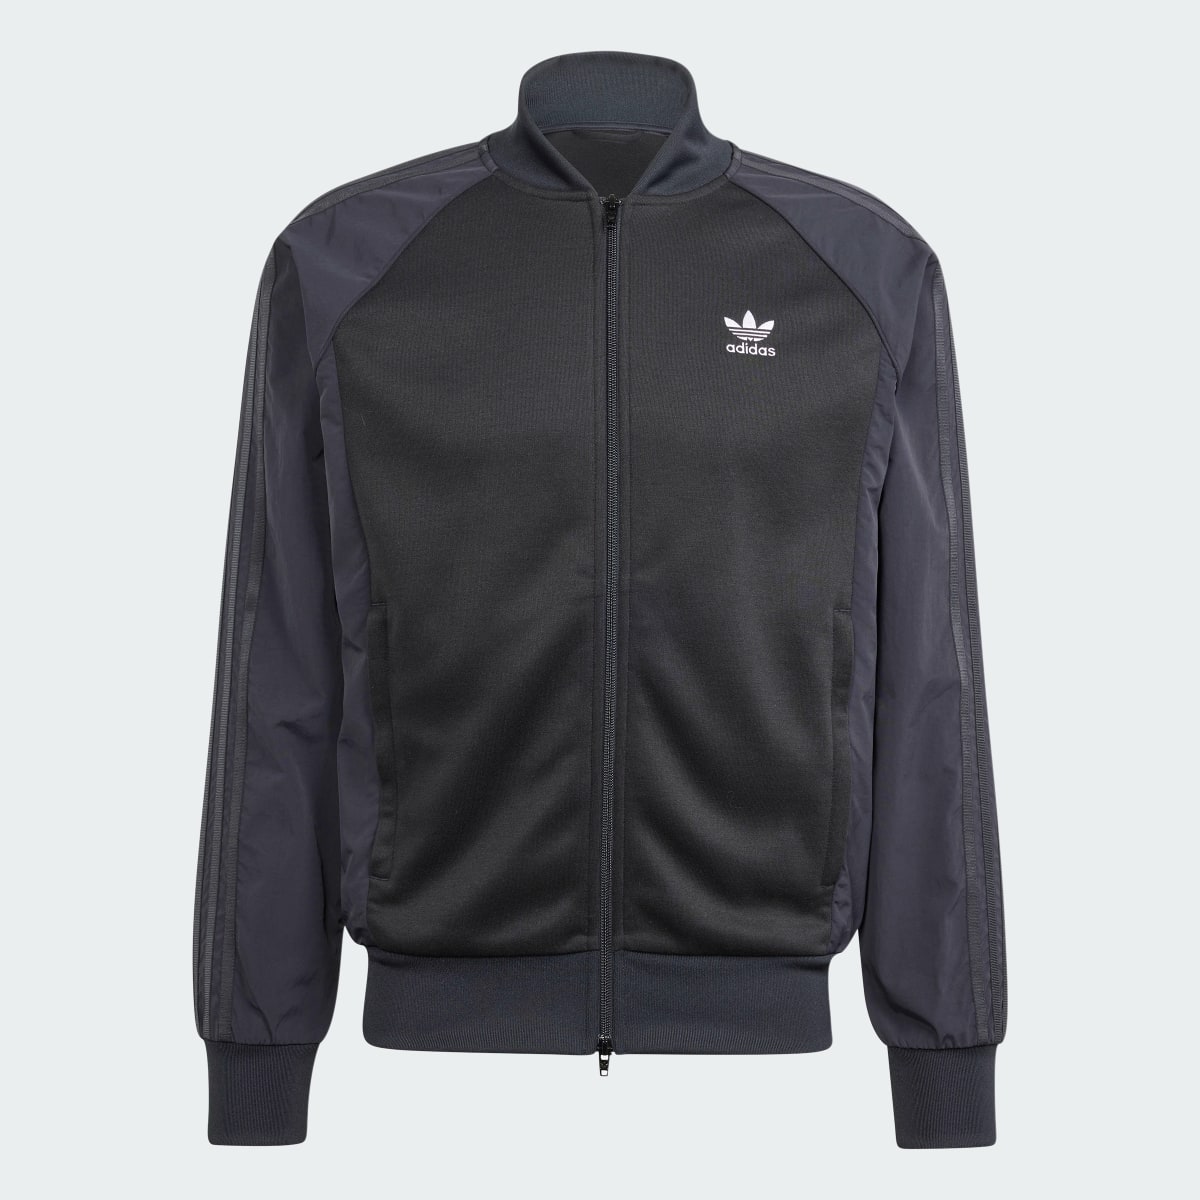 Adidas Track jacket adicolor Re-Pro SST Material Mix. 5